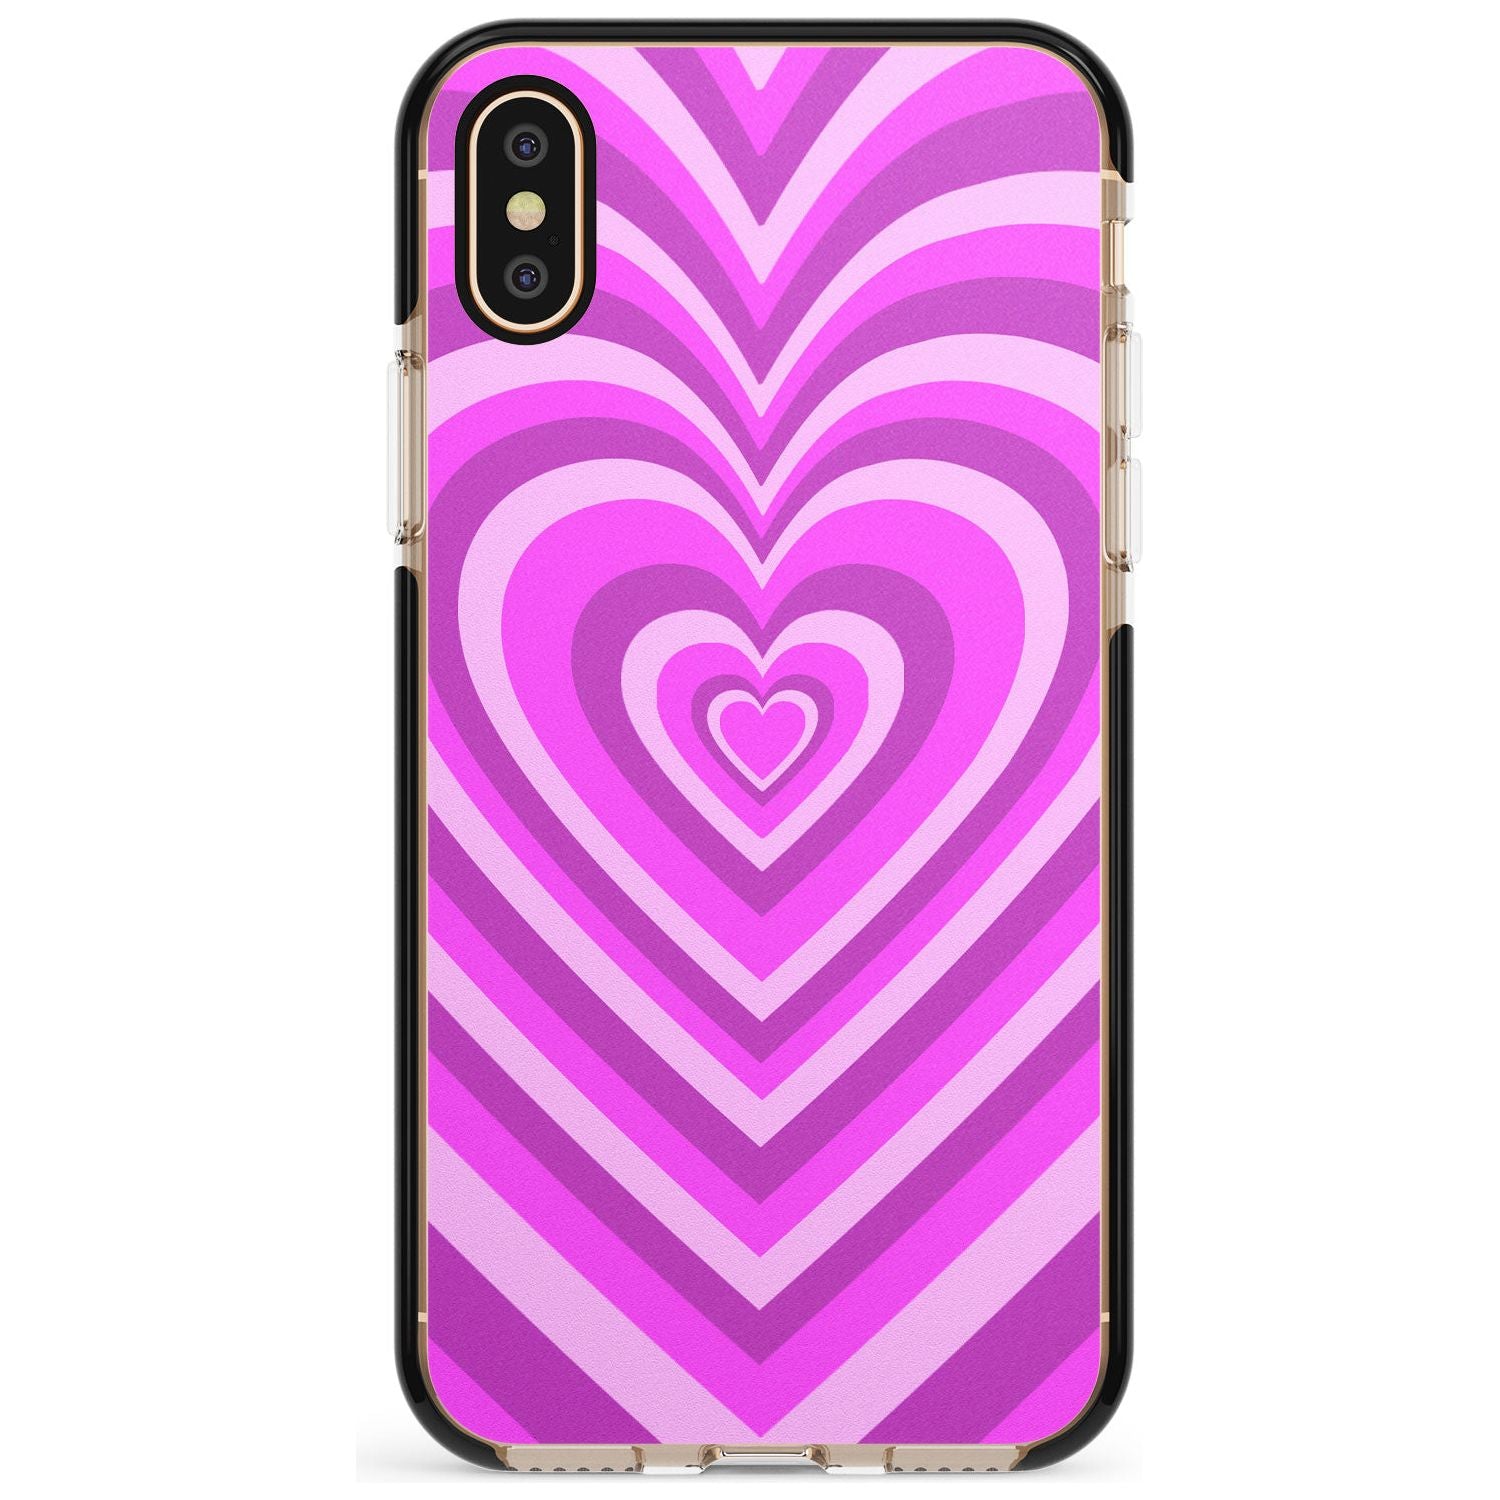 Pink Heart Illusion Black Impact Phone Case for iPhone X XS Max XR